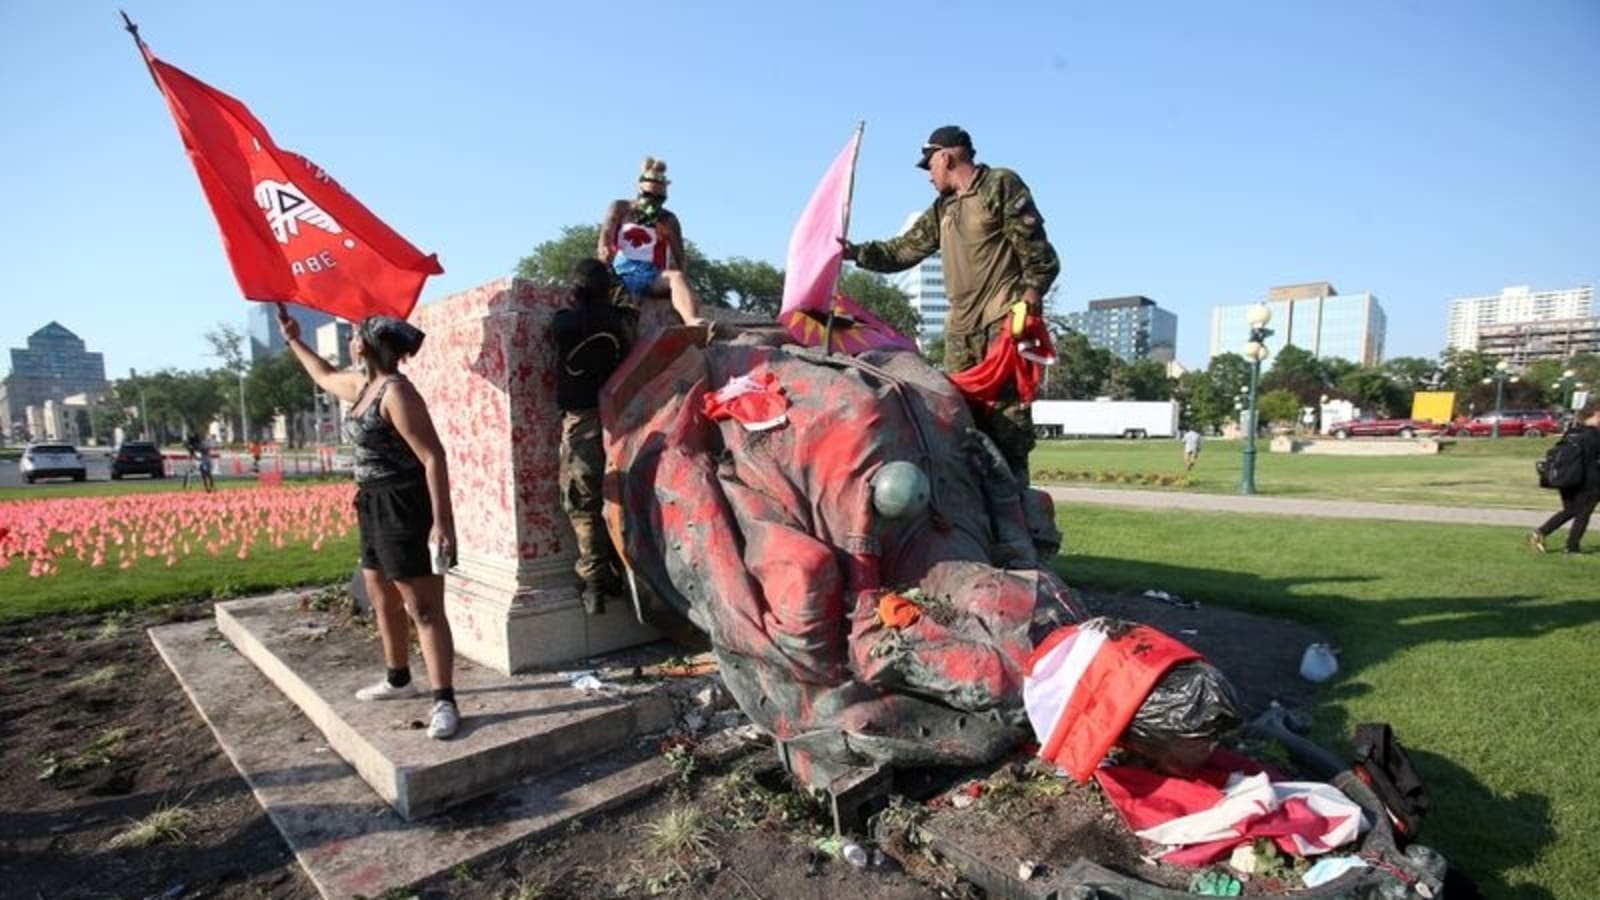 Queen Victoria, Queen Elizabeth II statues torn down, defaced in Canada by protesters against colonial past | World News